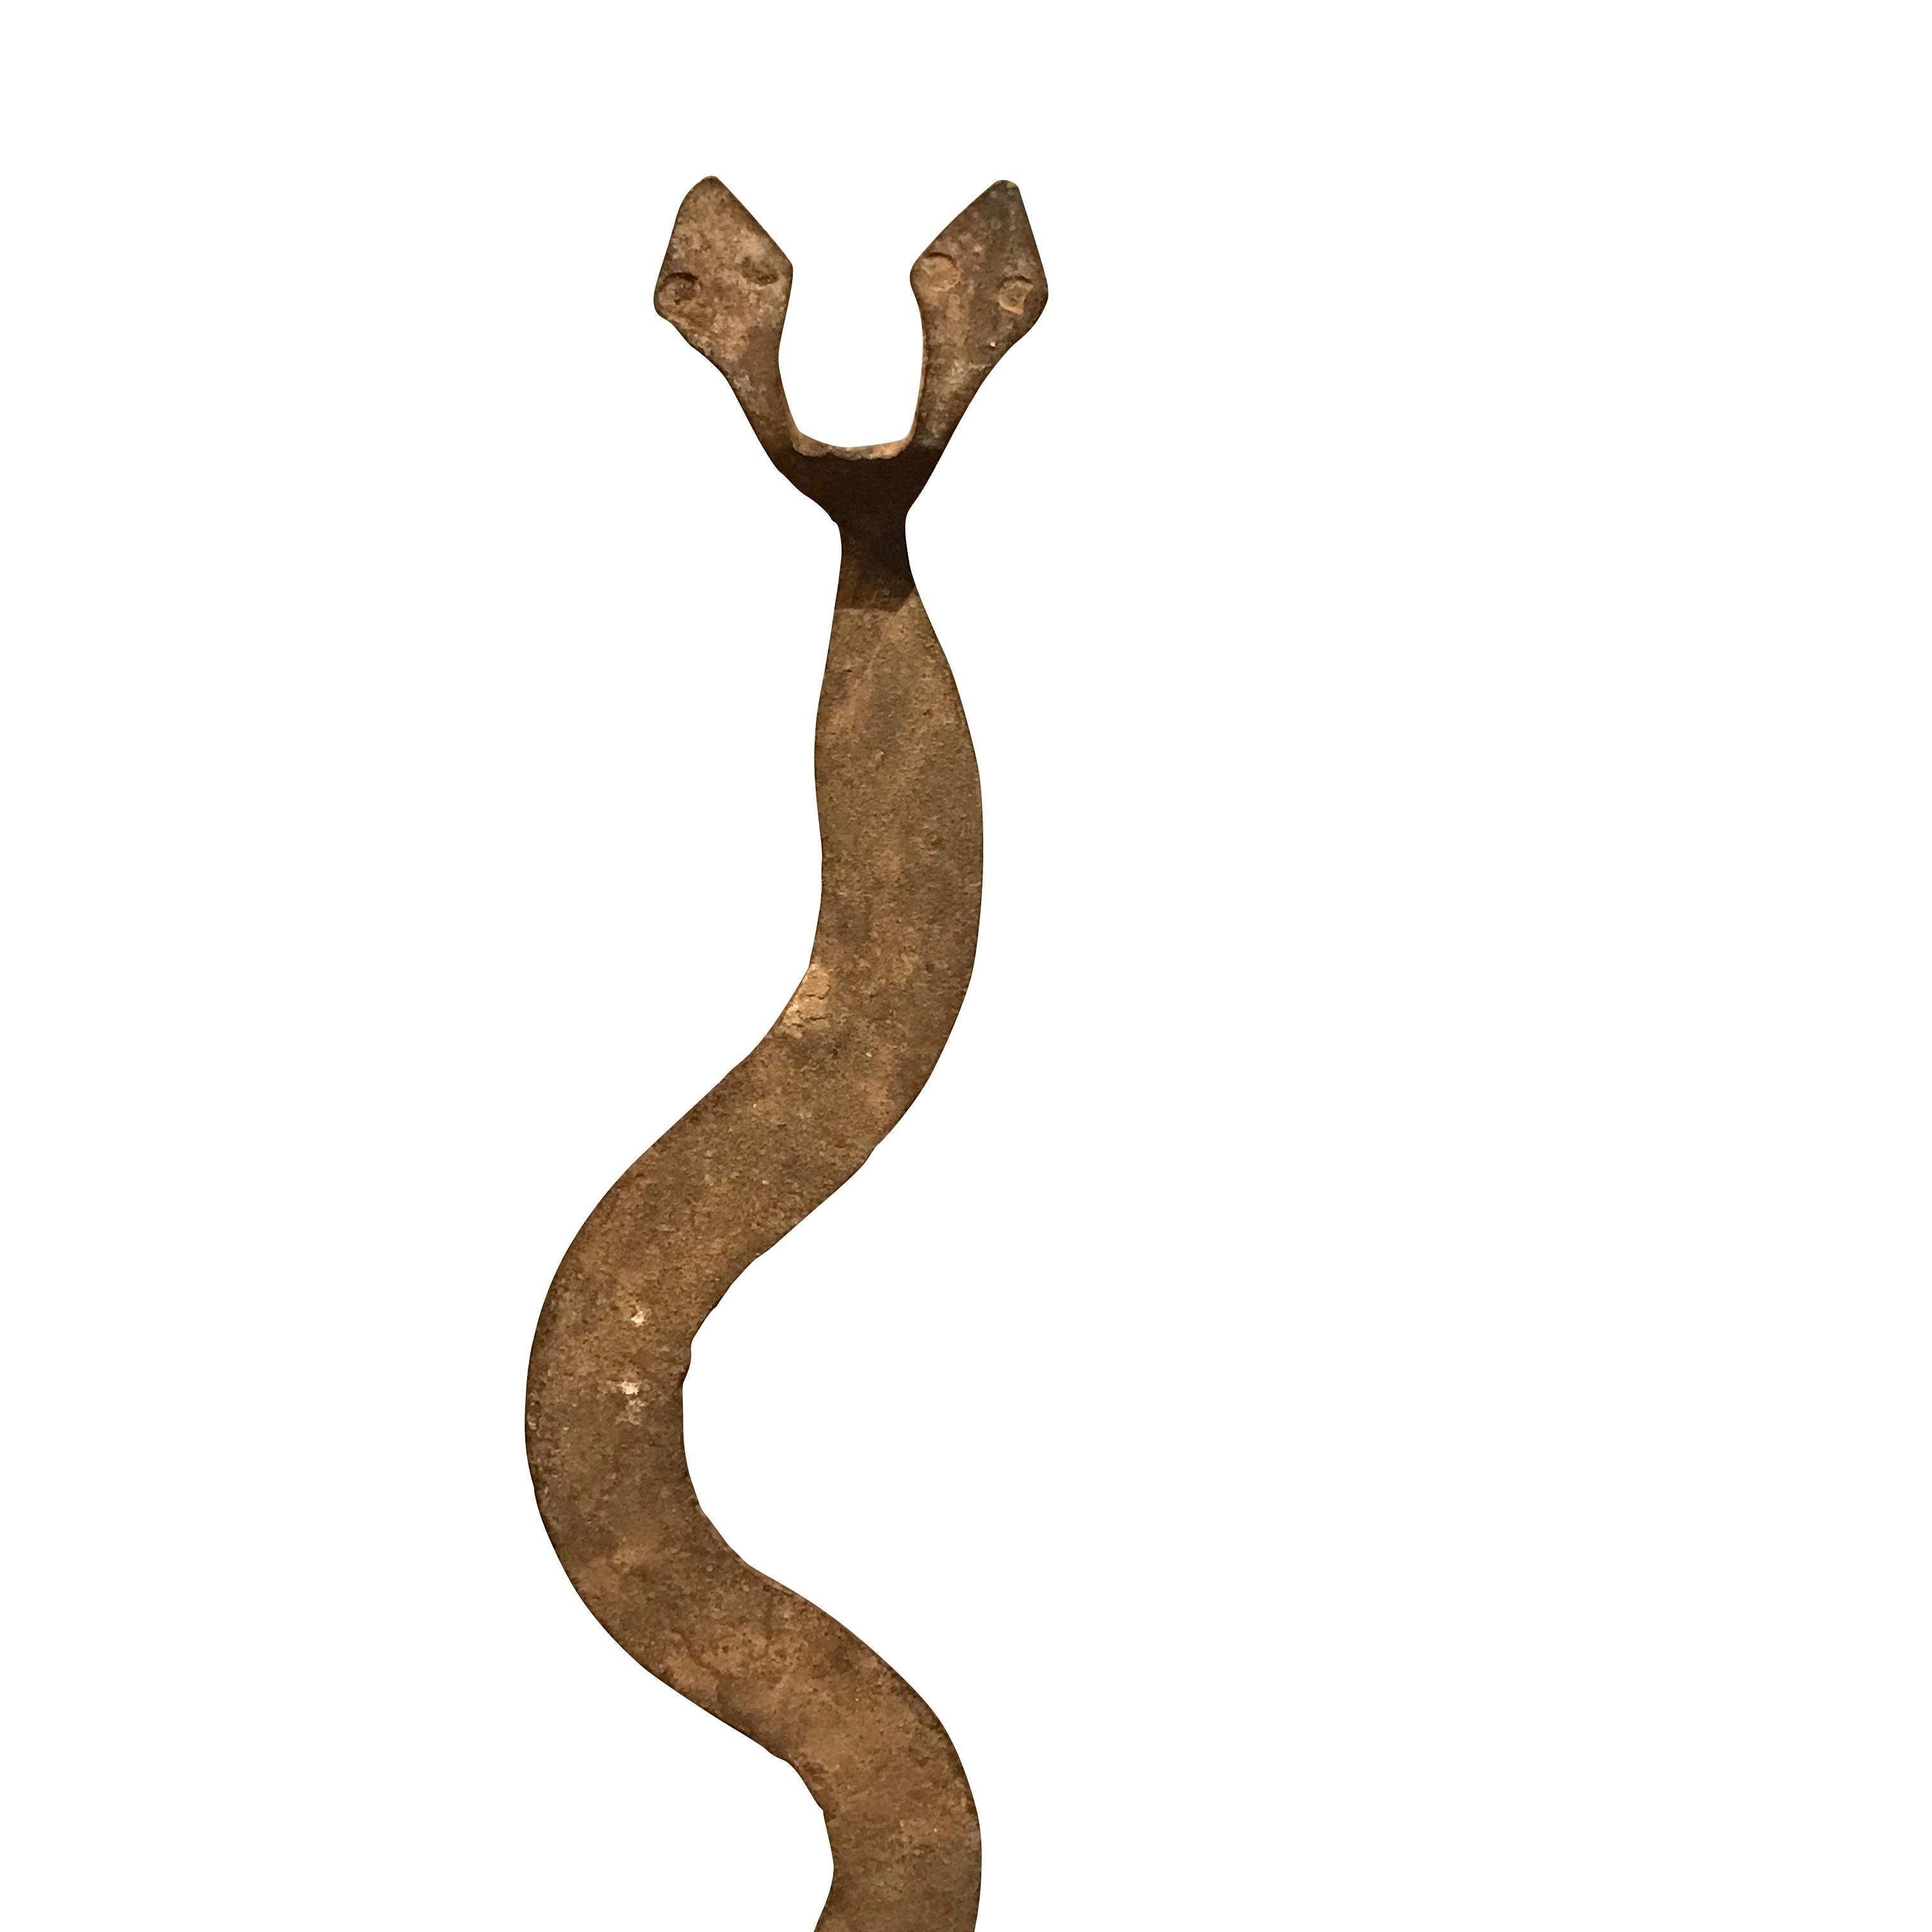 19th century iron snake sculpture on metal stand from the Lobi tribe in Burkina Faso, Africa
Naturally aged patina
Makes a great collection with S4589/90/92
Stand is steel and measures 4.5